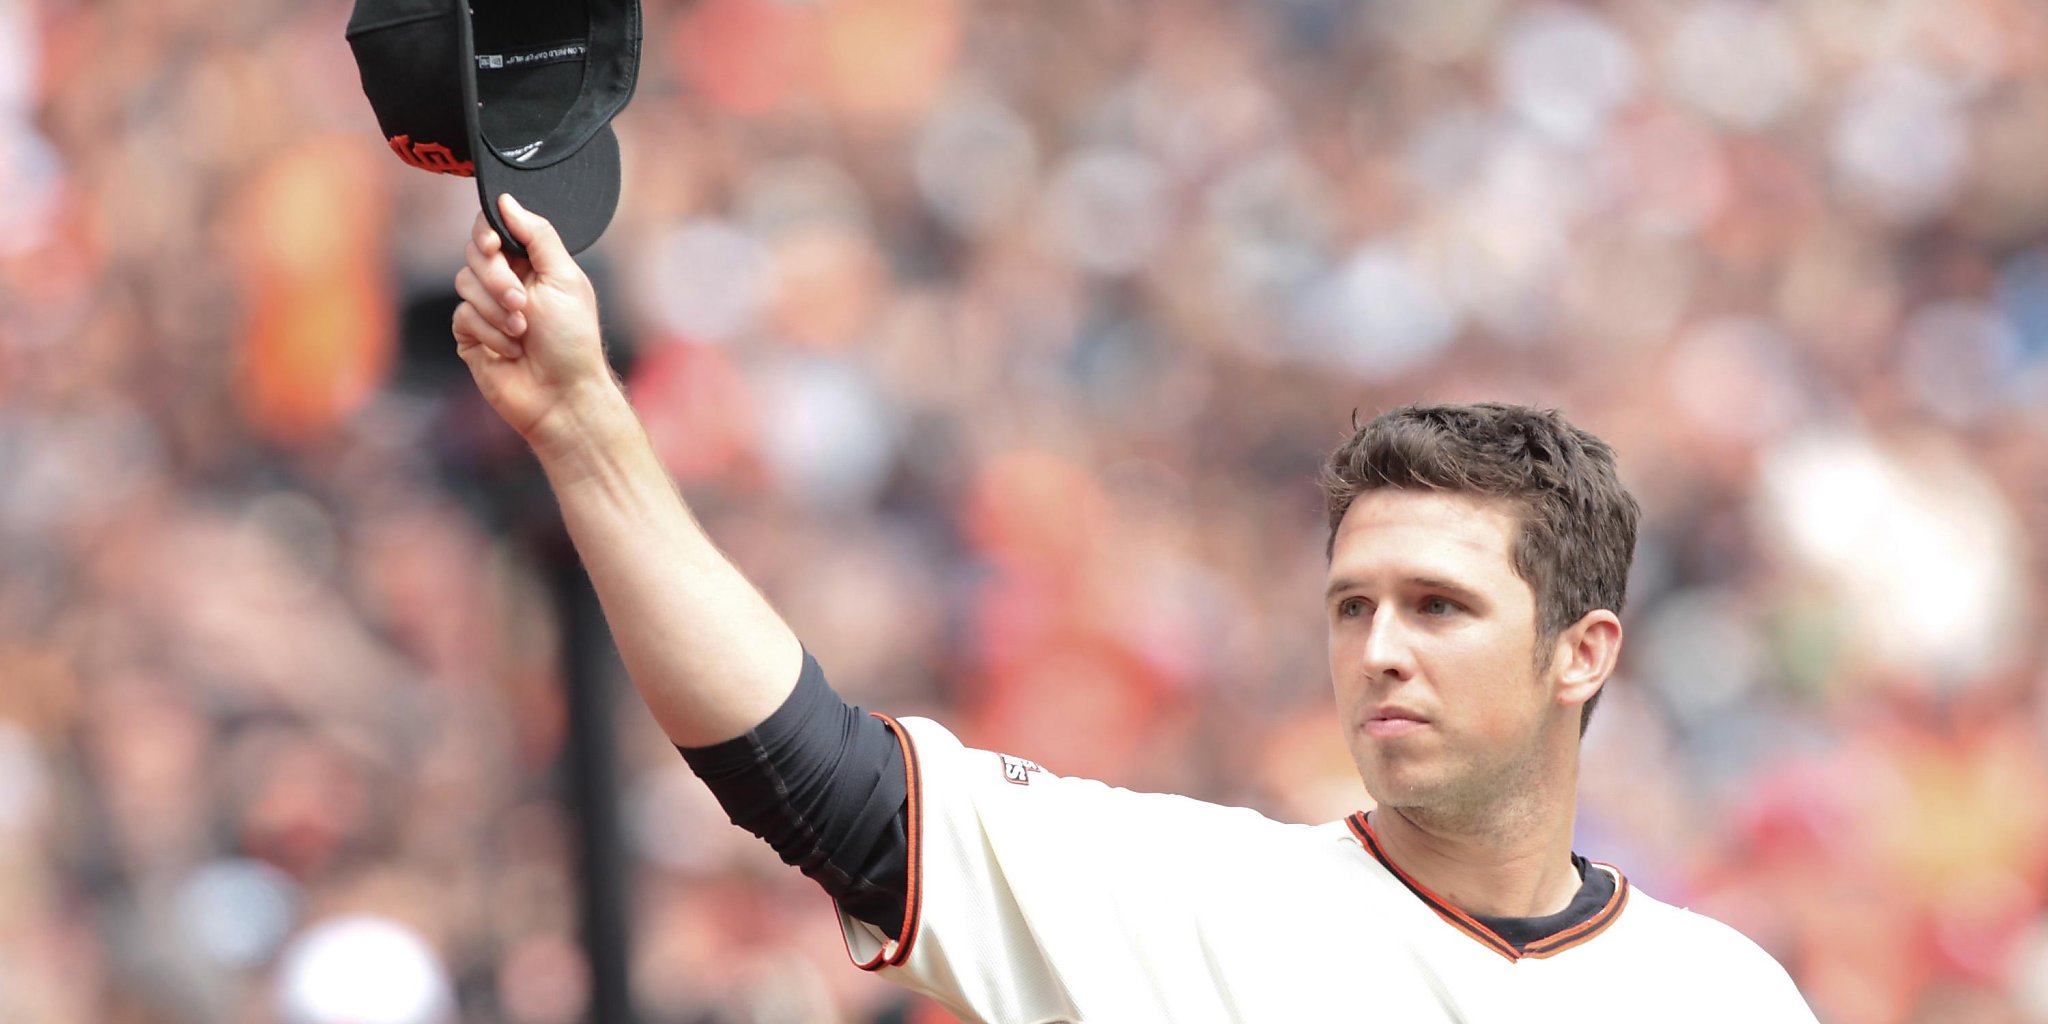 Buster Posey retires after 12 seasons with Giants, '12 slam vs. Reds